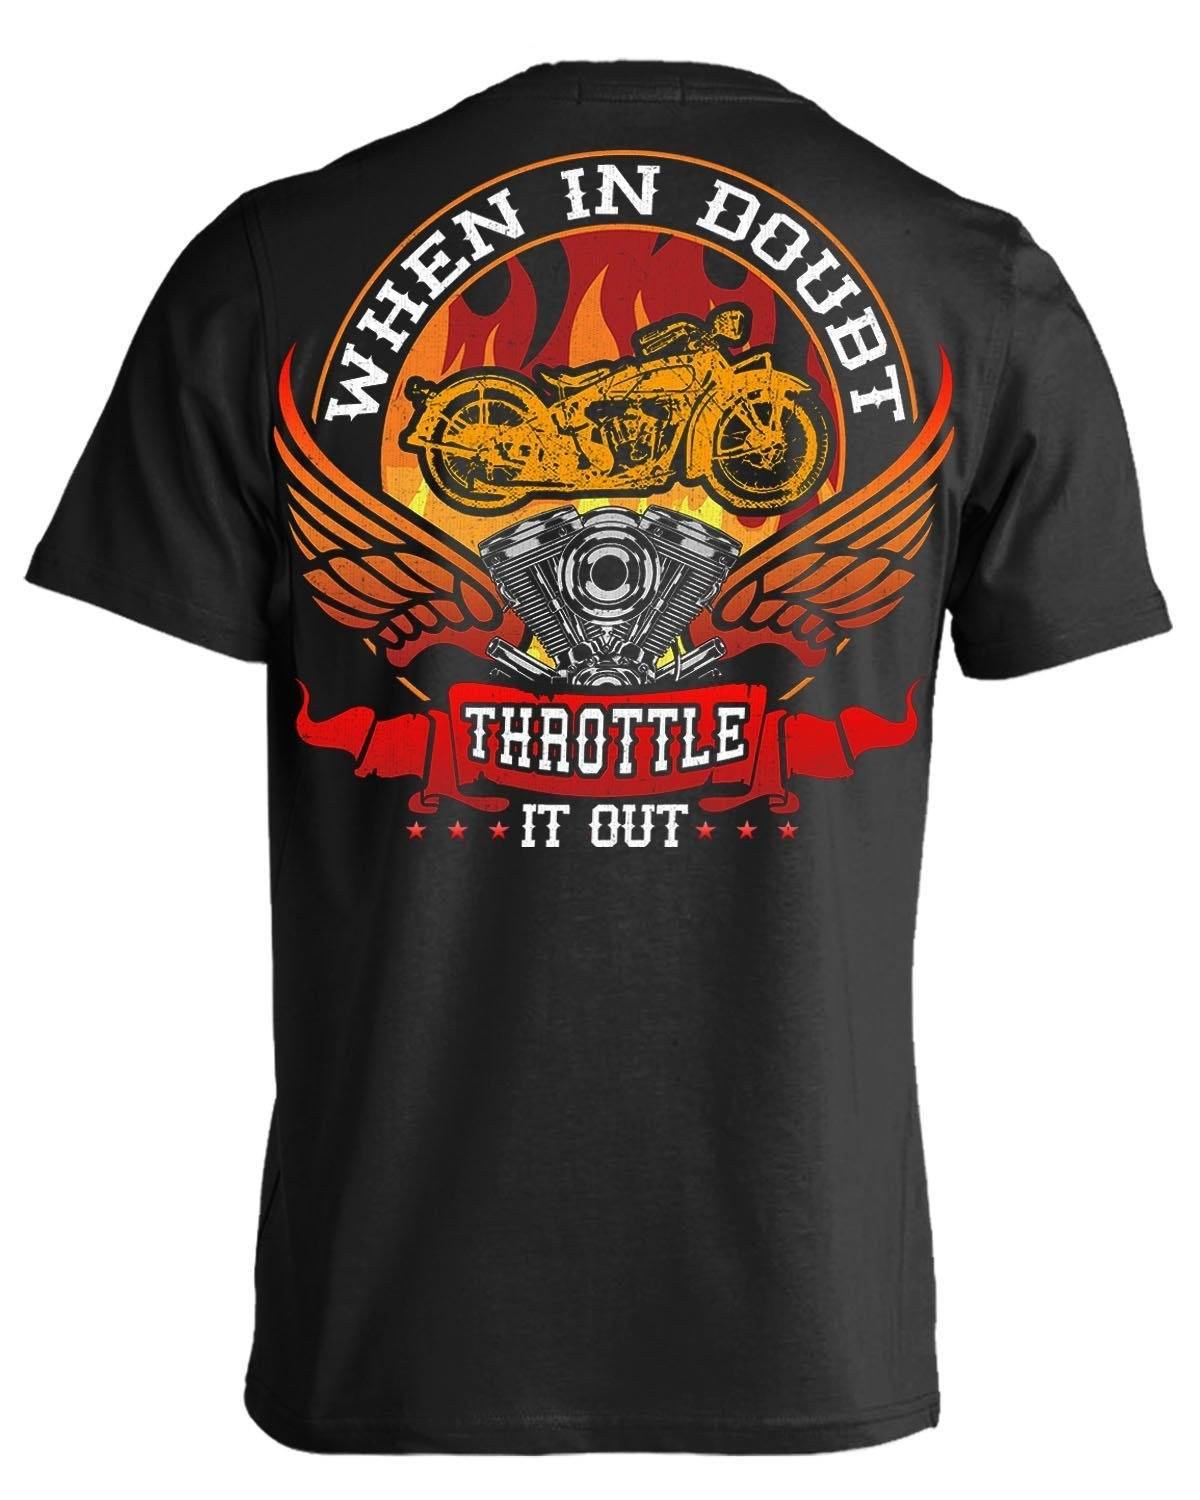 When In Doubt Throttle It Out T-Shirt - The Bikers' Den